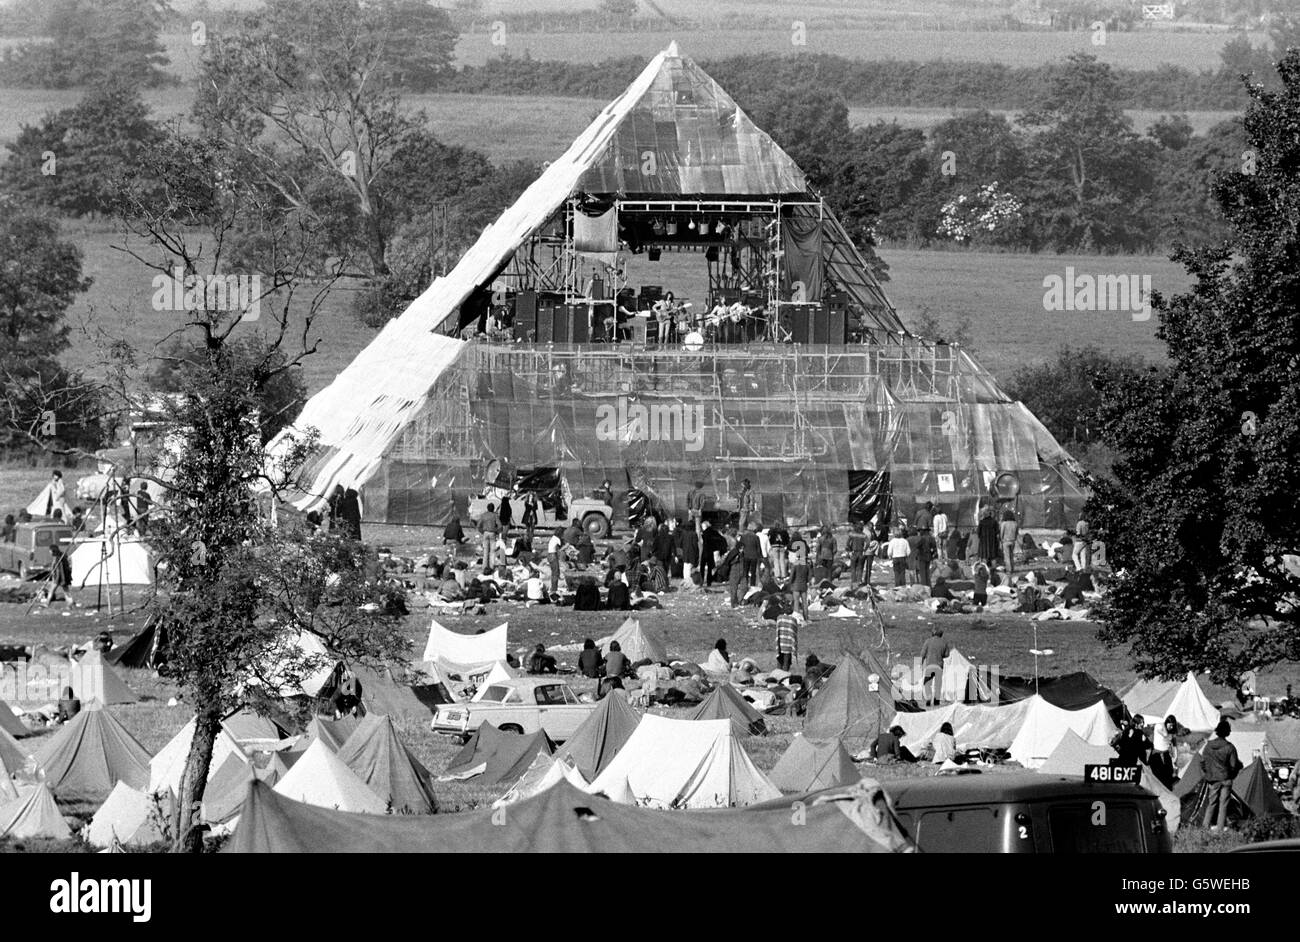 A plastic pyramid shelters the dais and is surrounded by smaller tents of participants at Worthy farm, Pilton, for the Glastonbury festival. Stock Photo